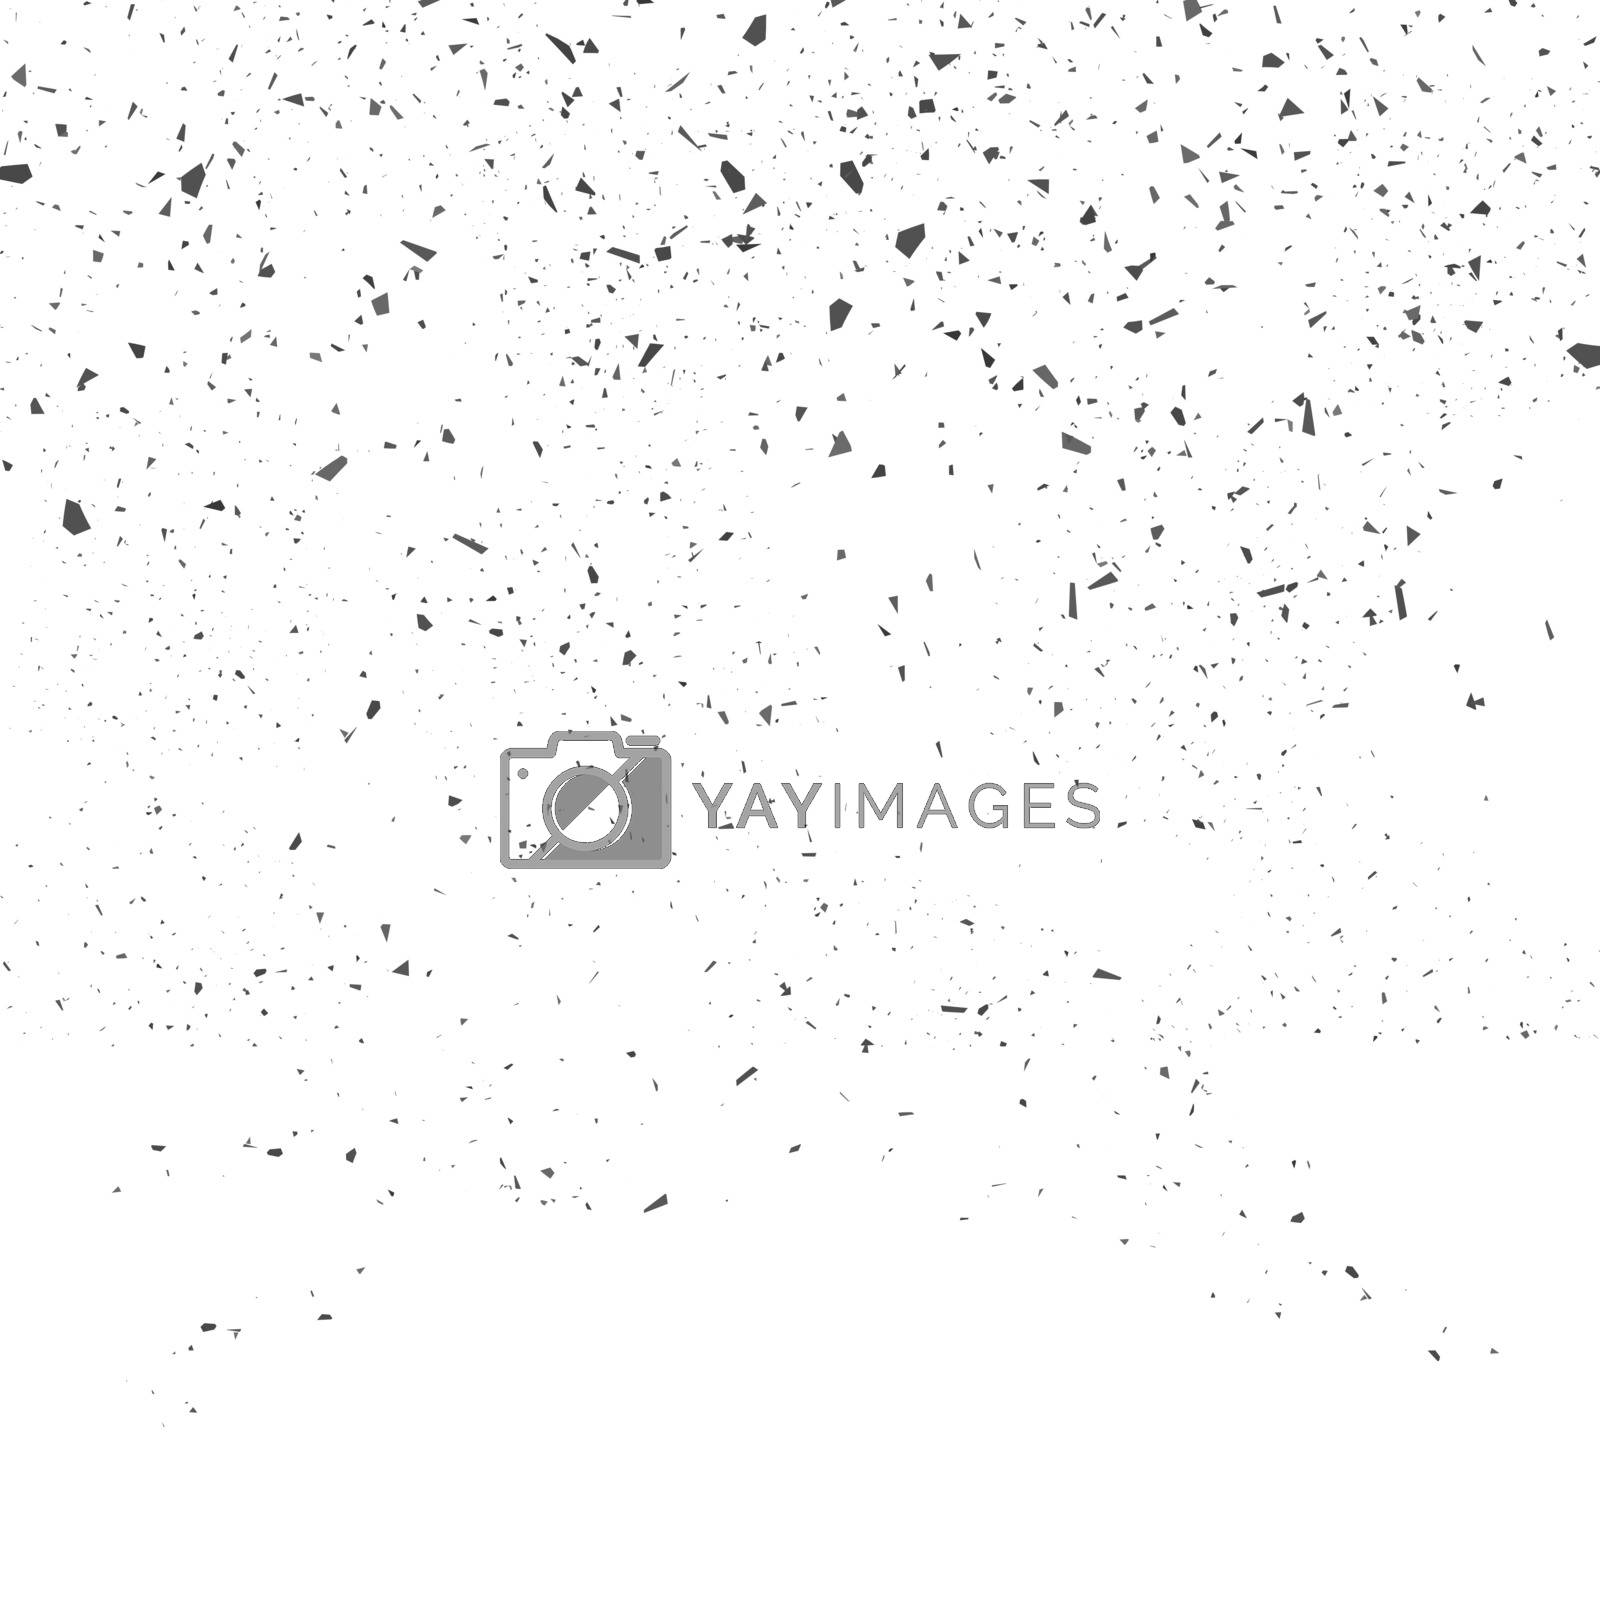 Royalty free image of Grey Confetti Seamless Pattern on White Background. Set of Particles. by valeo5